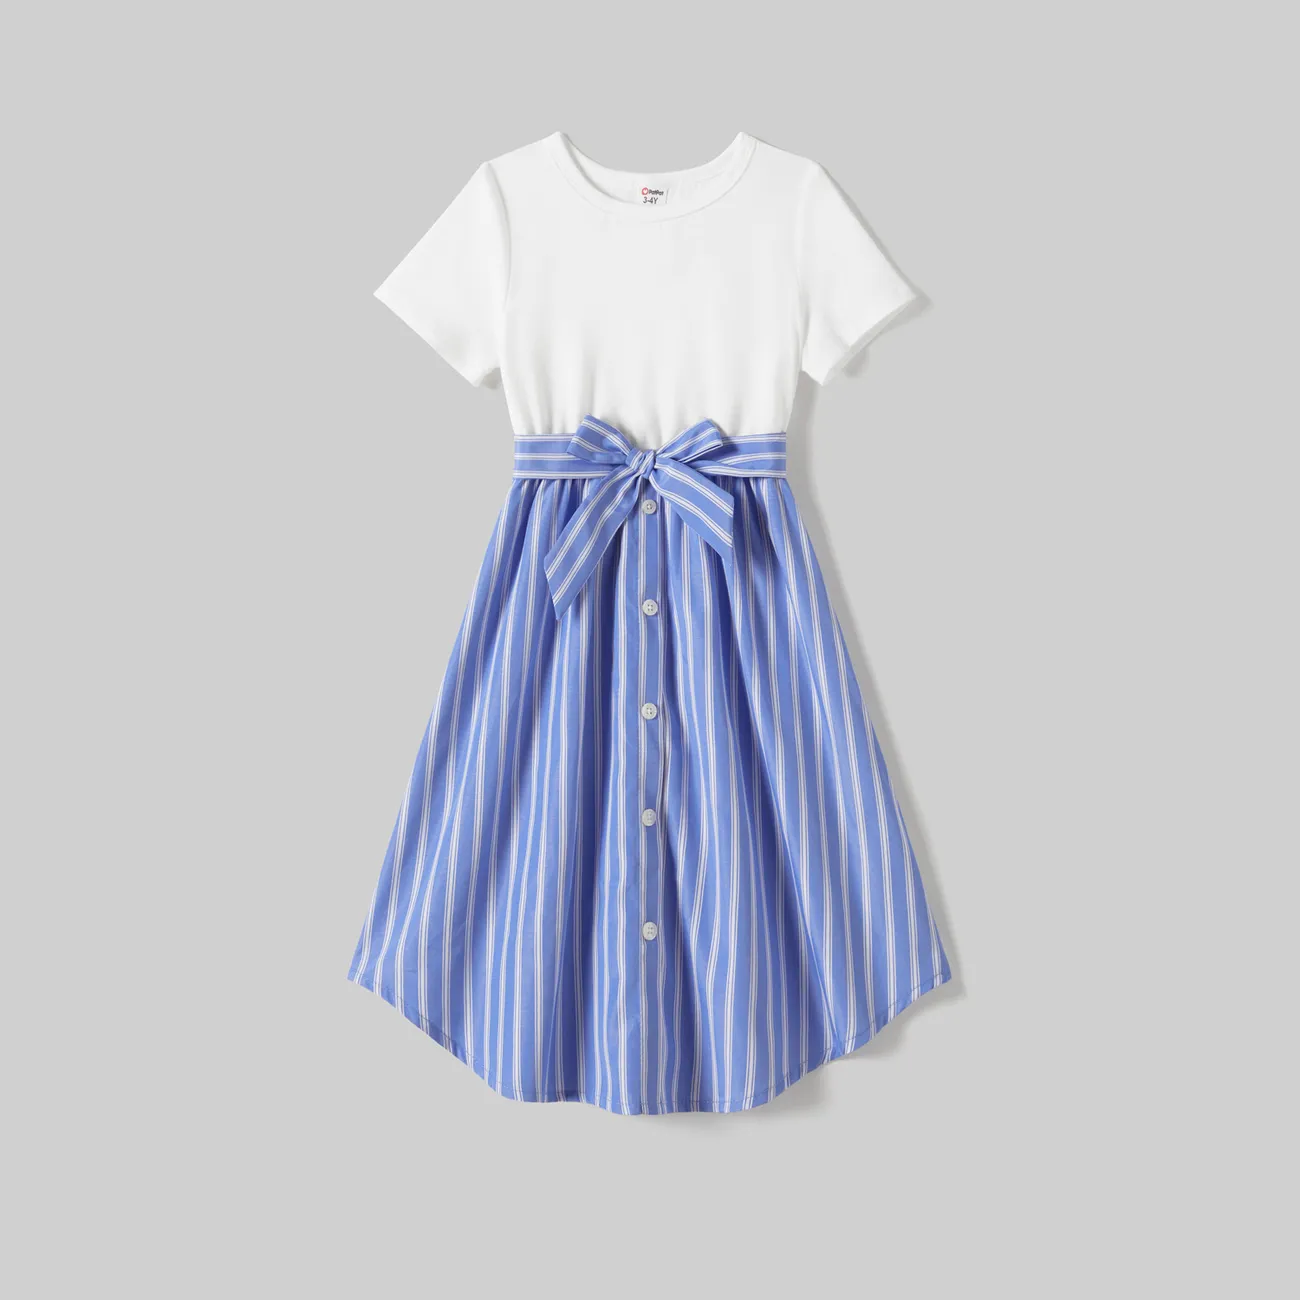 Family Matching Striped Button Belted High Low Hem Dresses and Striped Short Sleeve Tops Sets BLUEWHITE big image 1